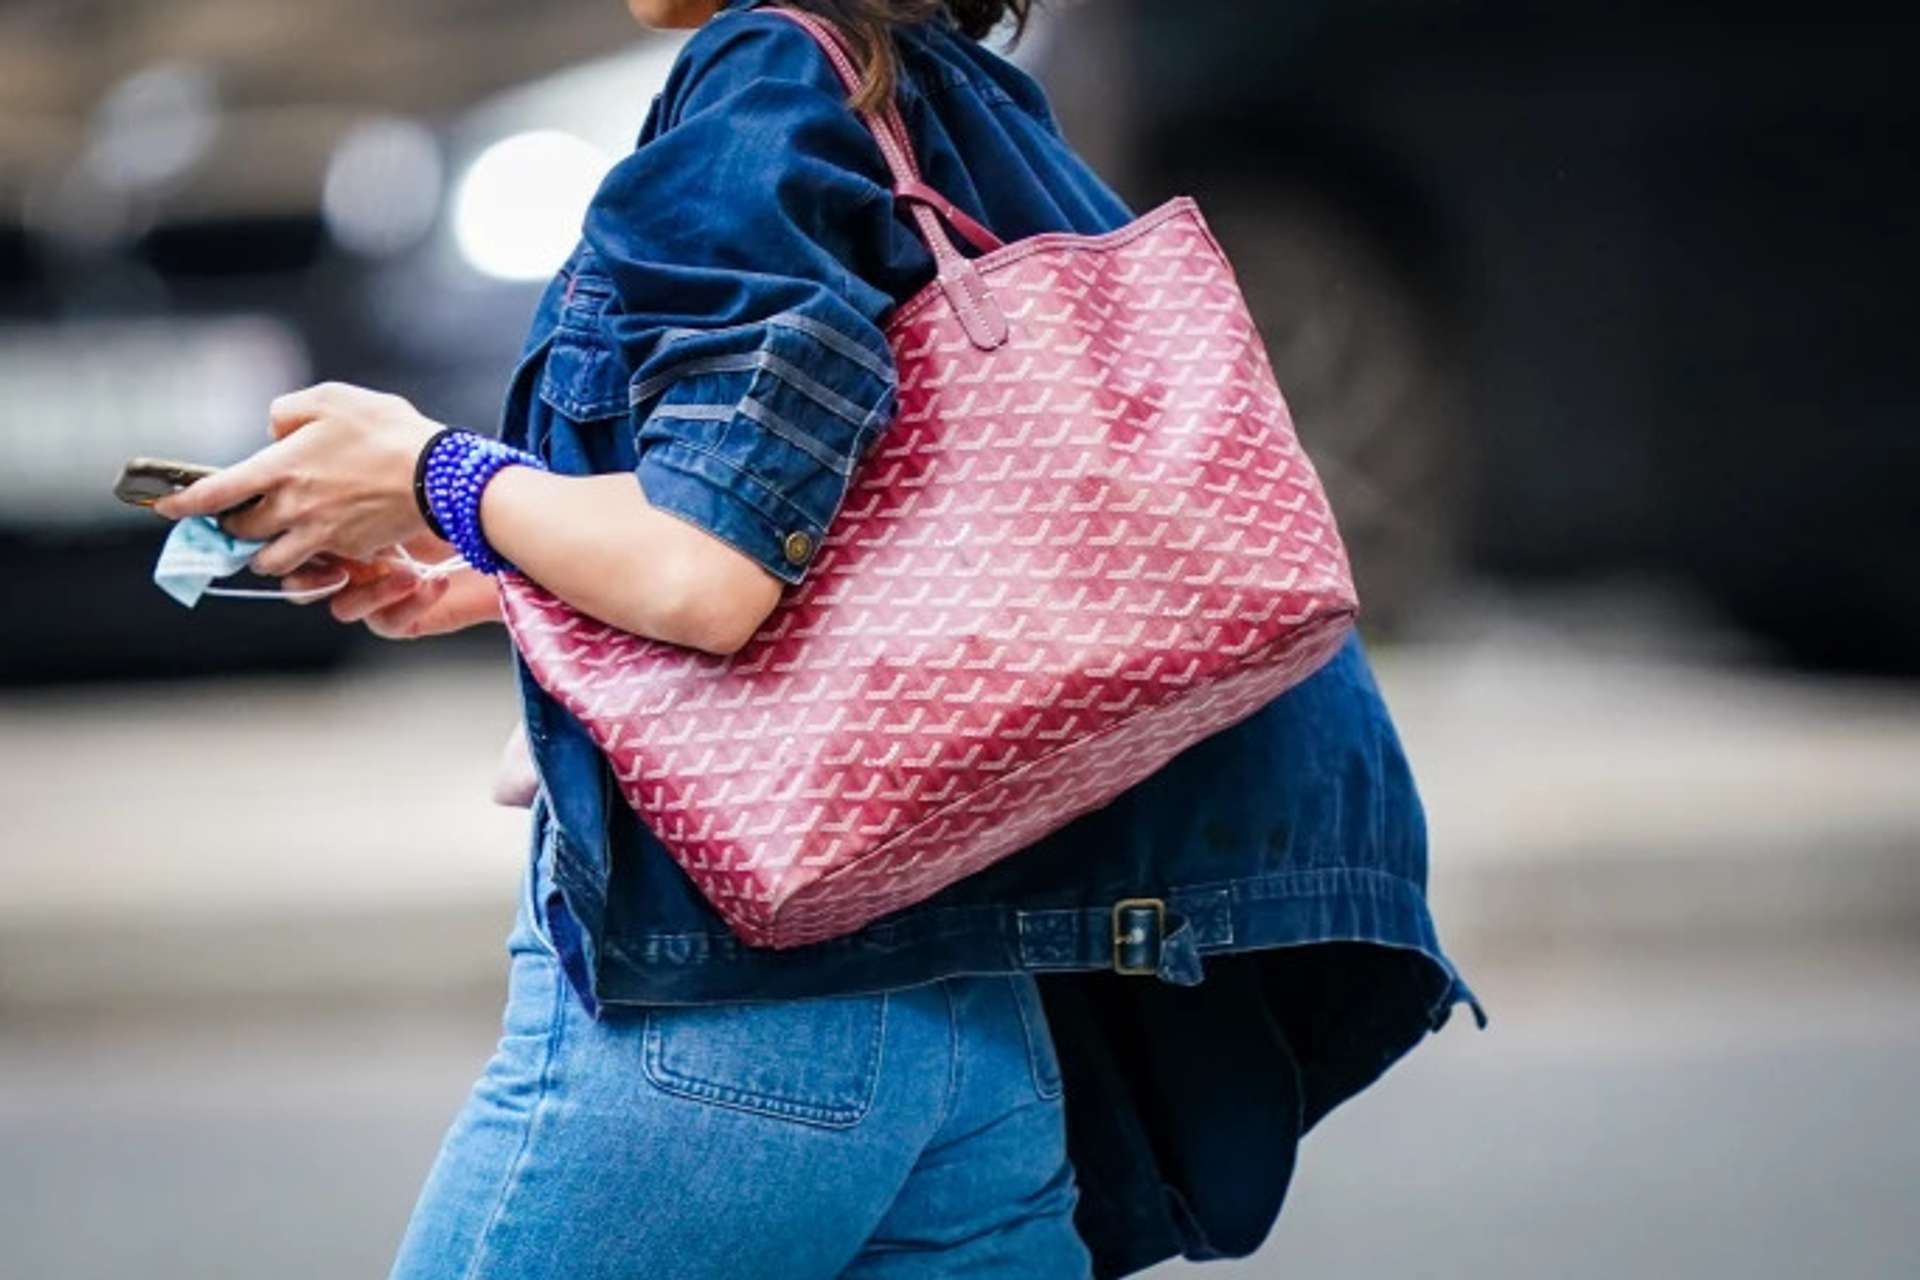 Goyard PM vs GM Tote Bags: Which Is Better? - Jane Marvel